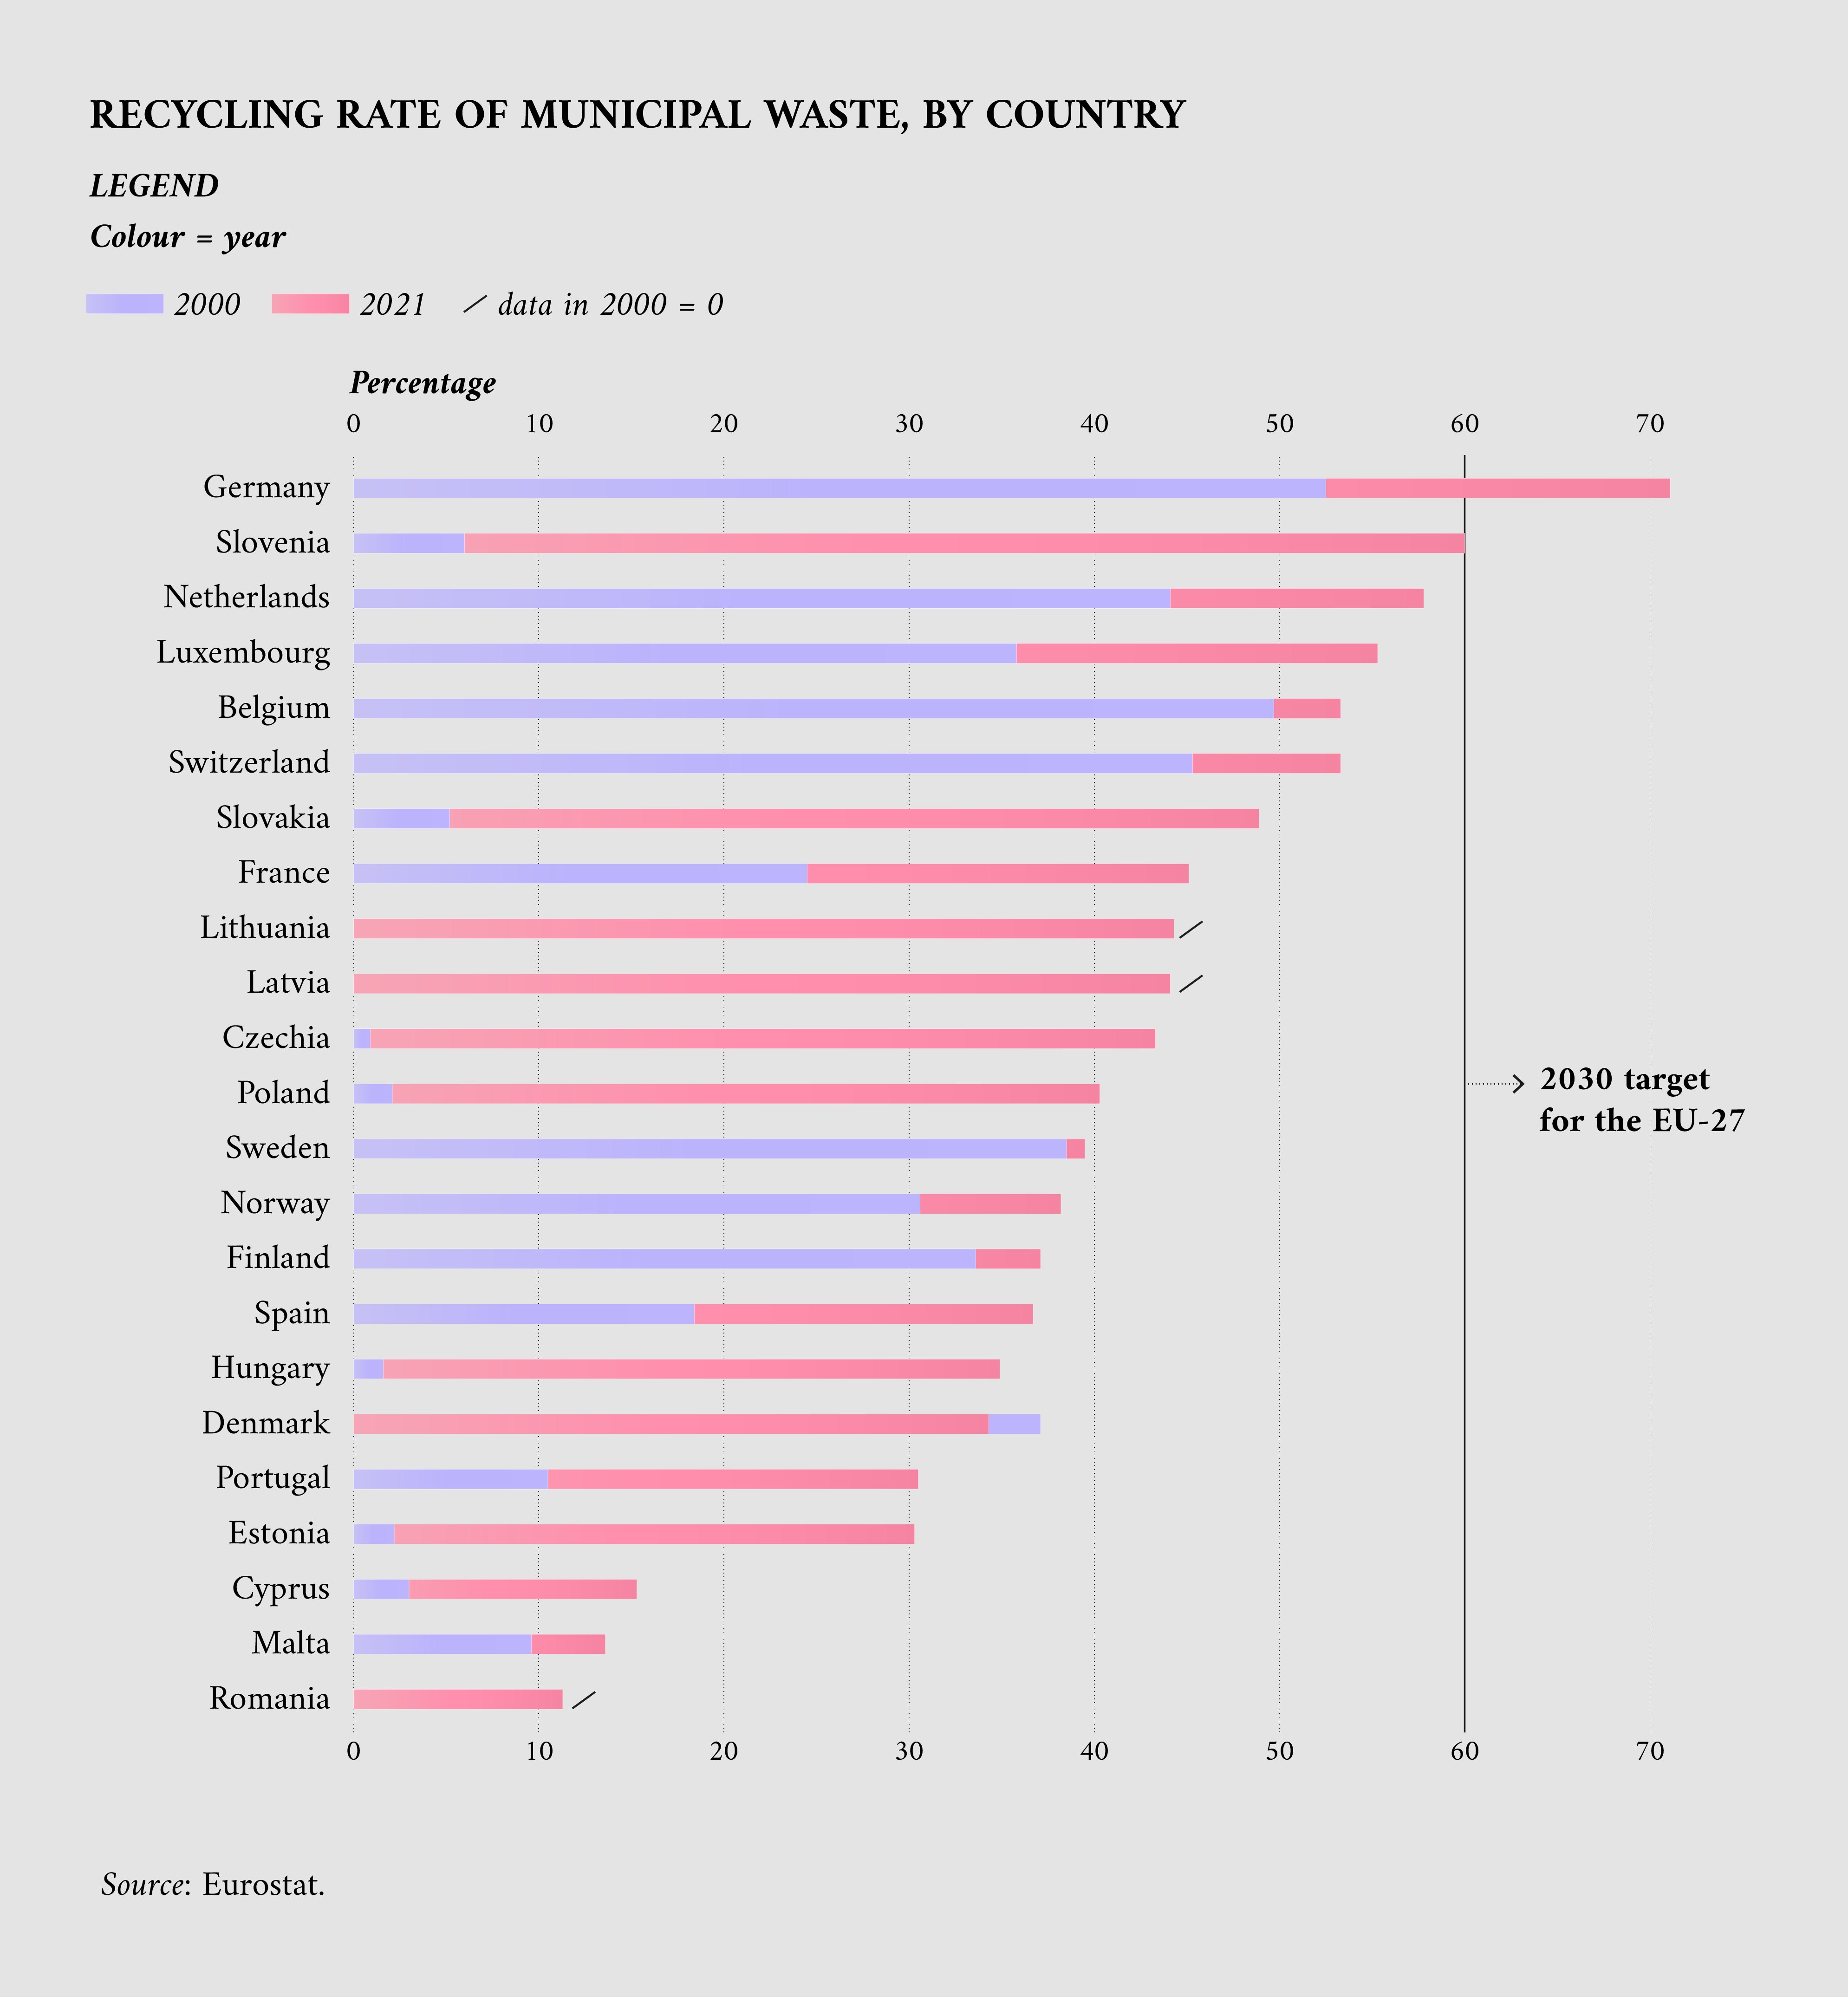 Recycling rates of municipal waste, by country in 2000 and 2021.